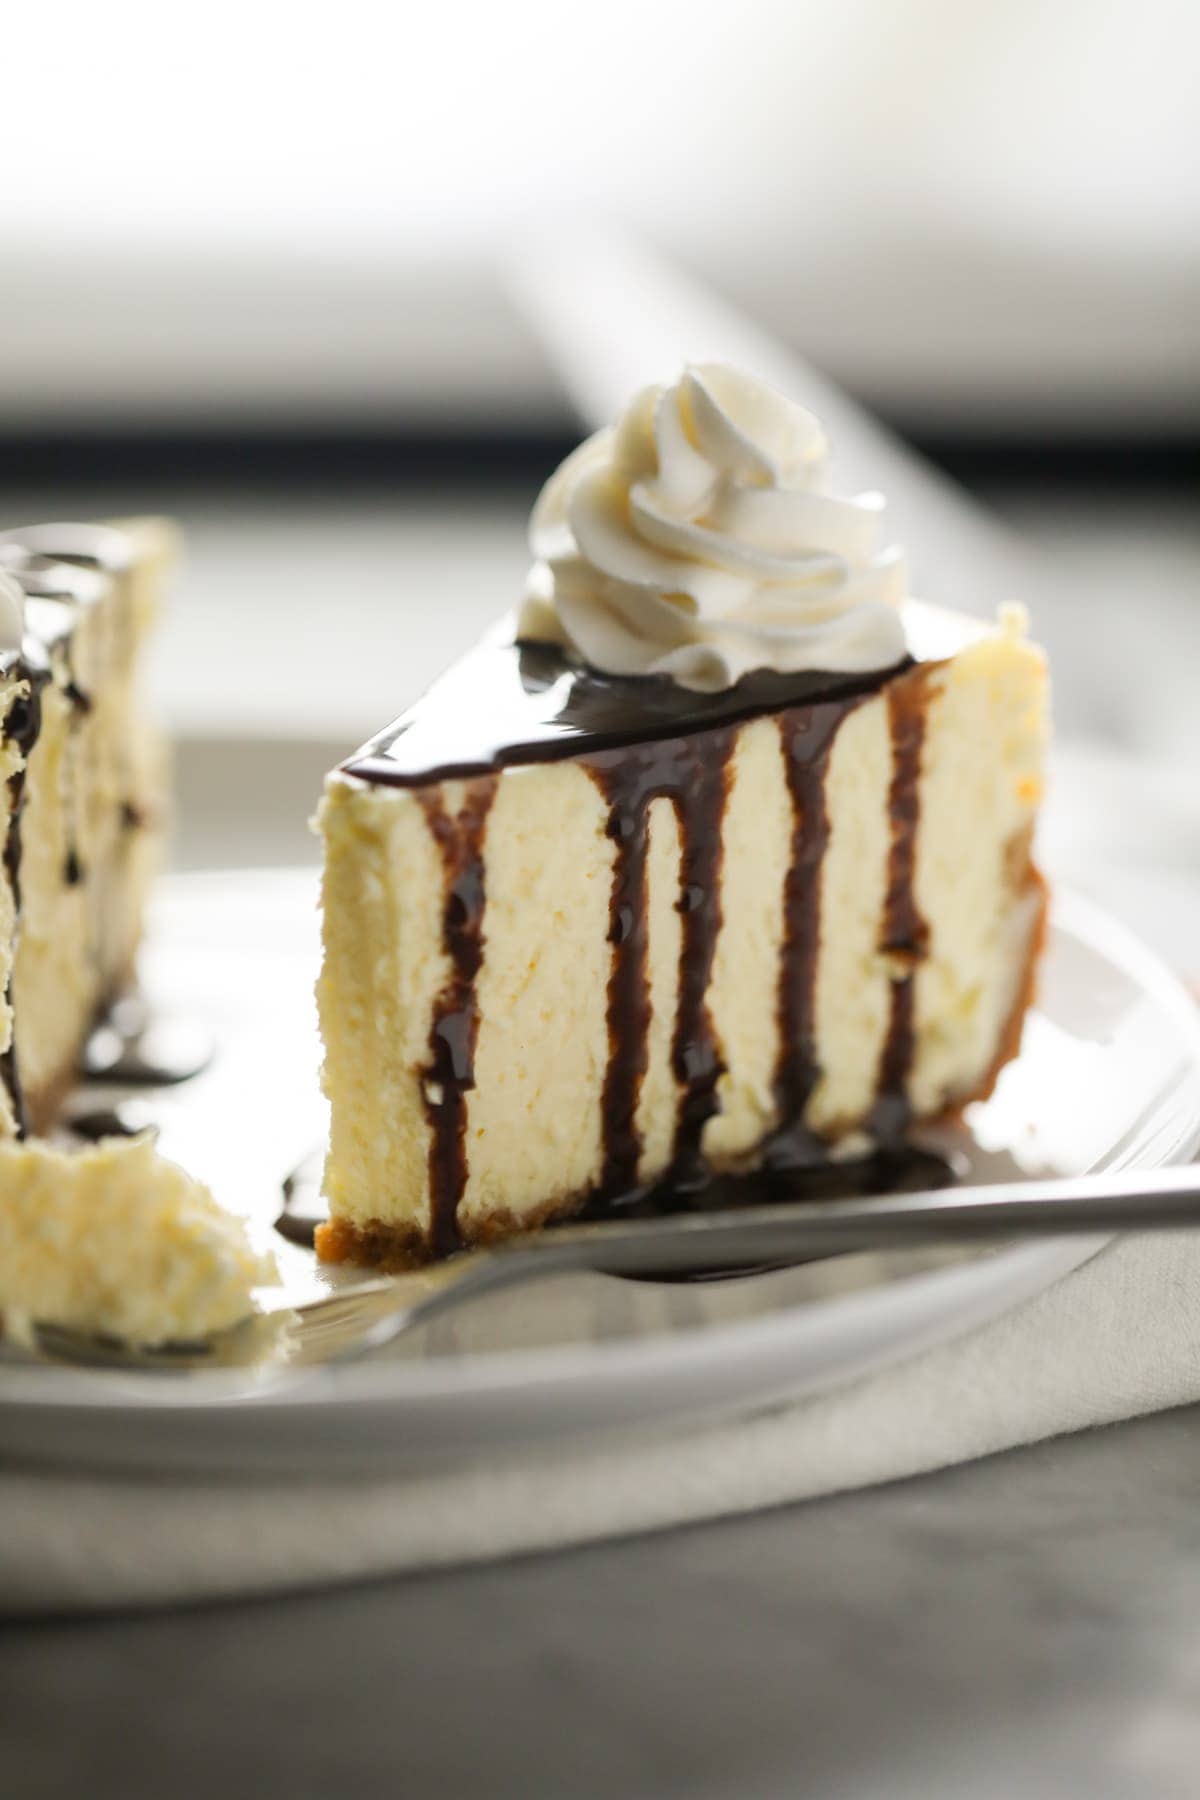 Slice of Cheesecake with Chocolate Sauce and whipped cream